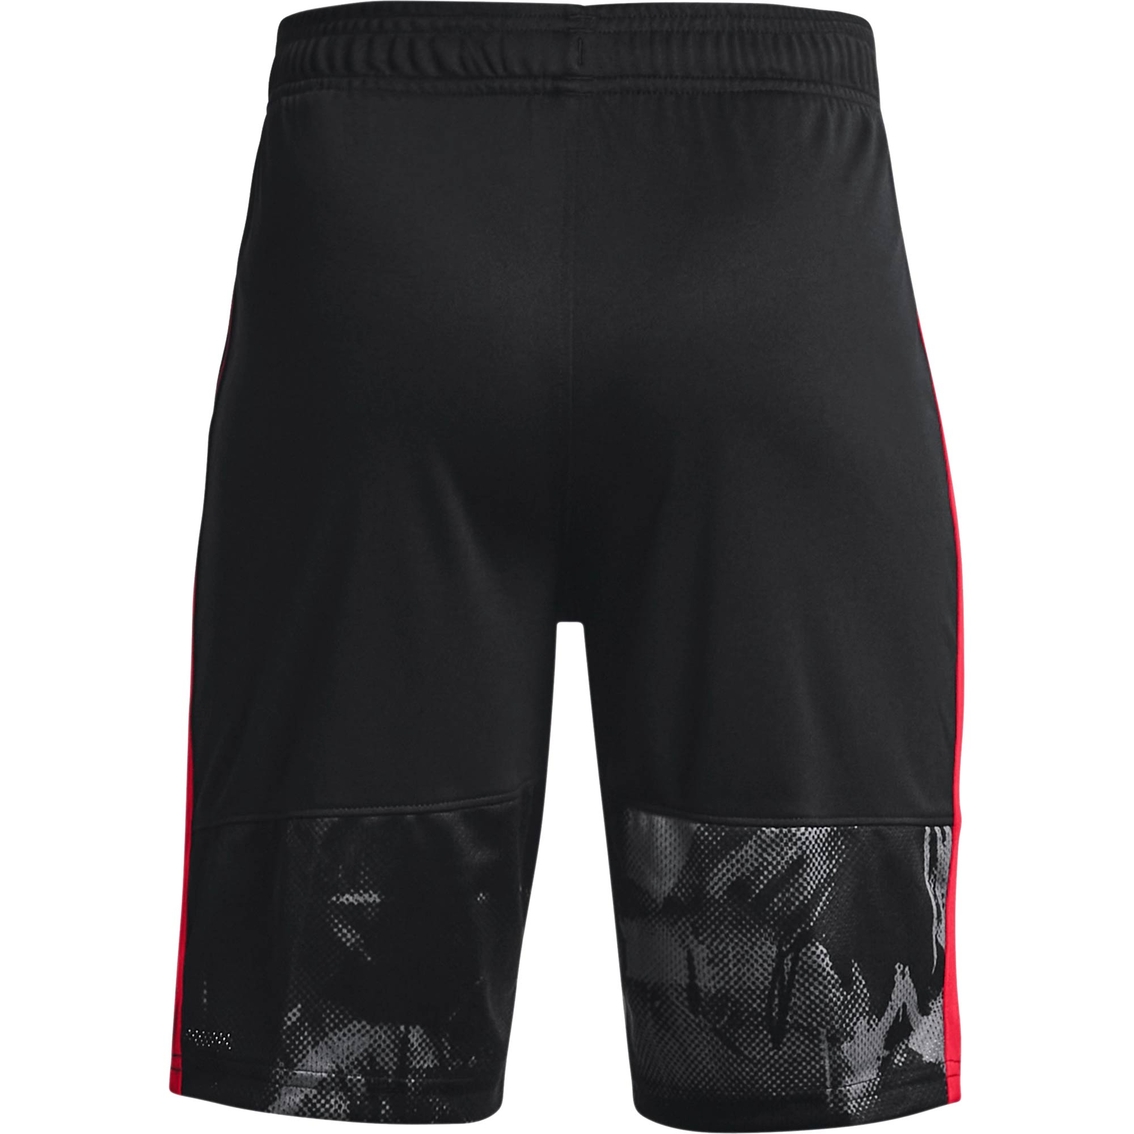 Under Armour Boys Stunt 3.0 Printed Shorts - Image 2 of 2